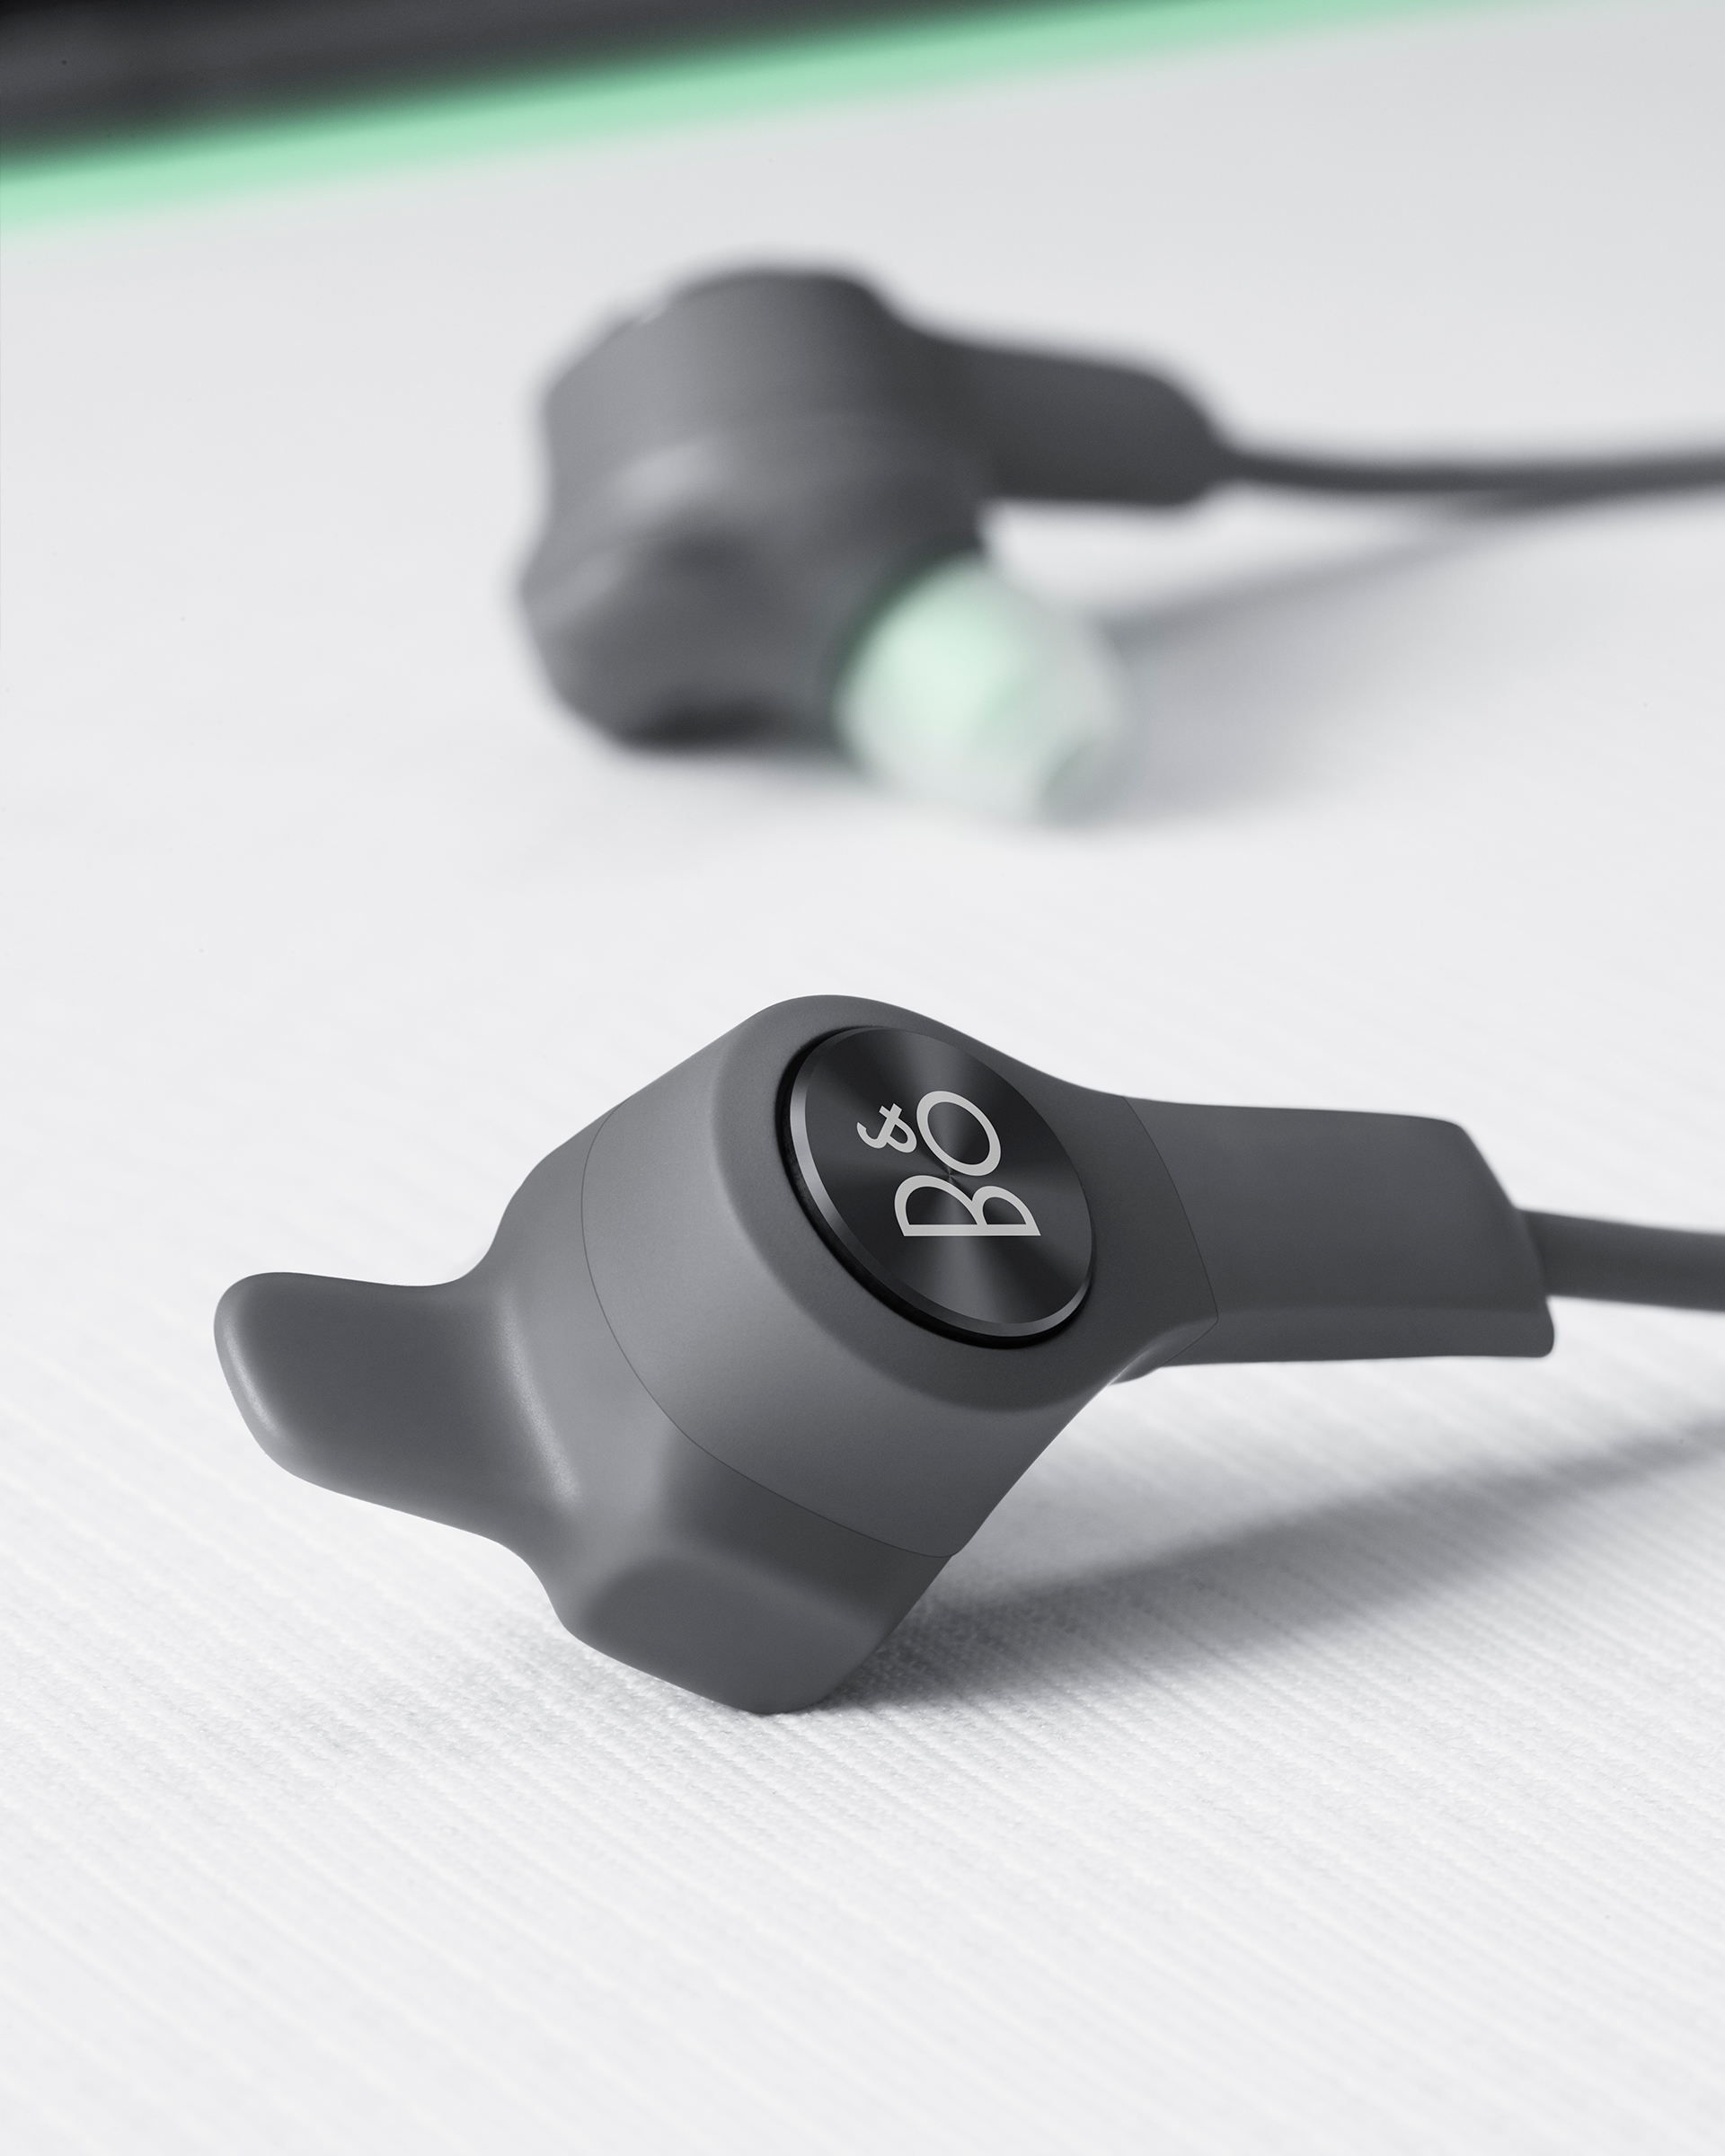 Detail view of Beoplay E6 Motion earbuds in Graphite colour